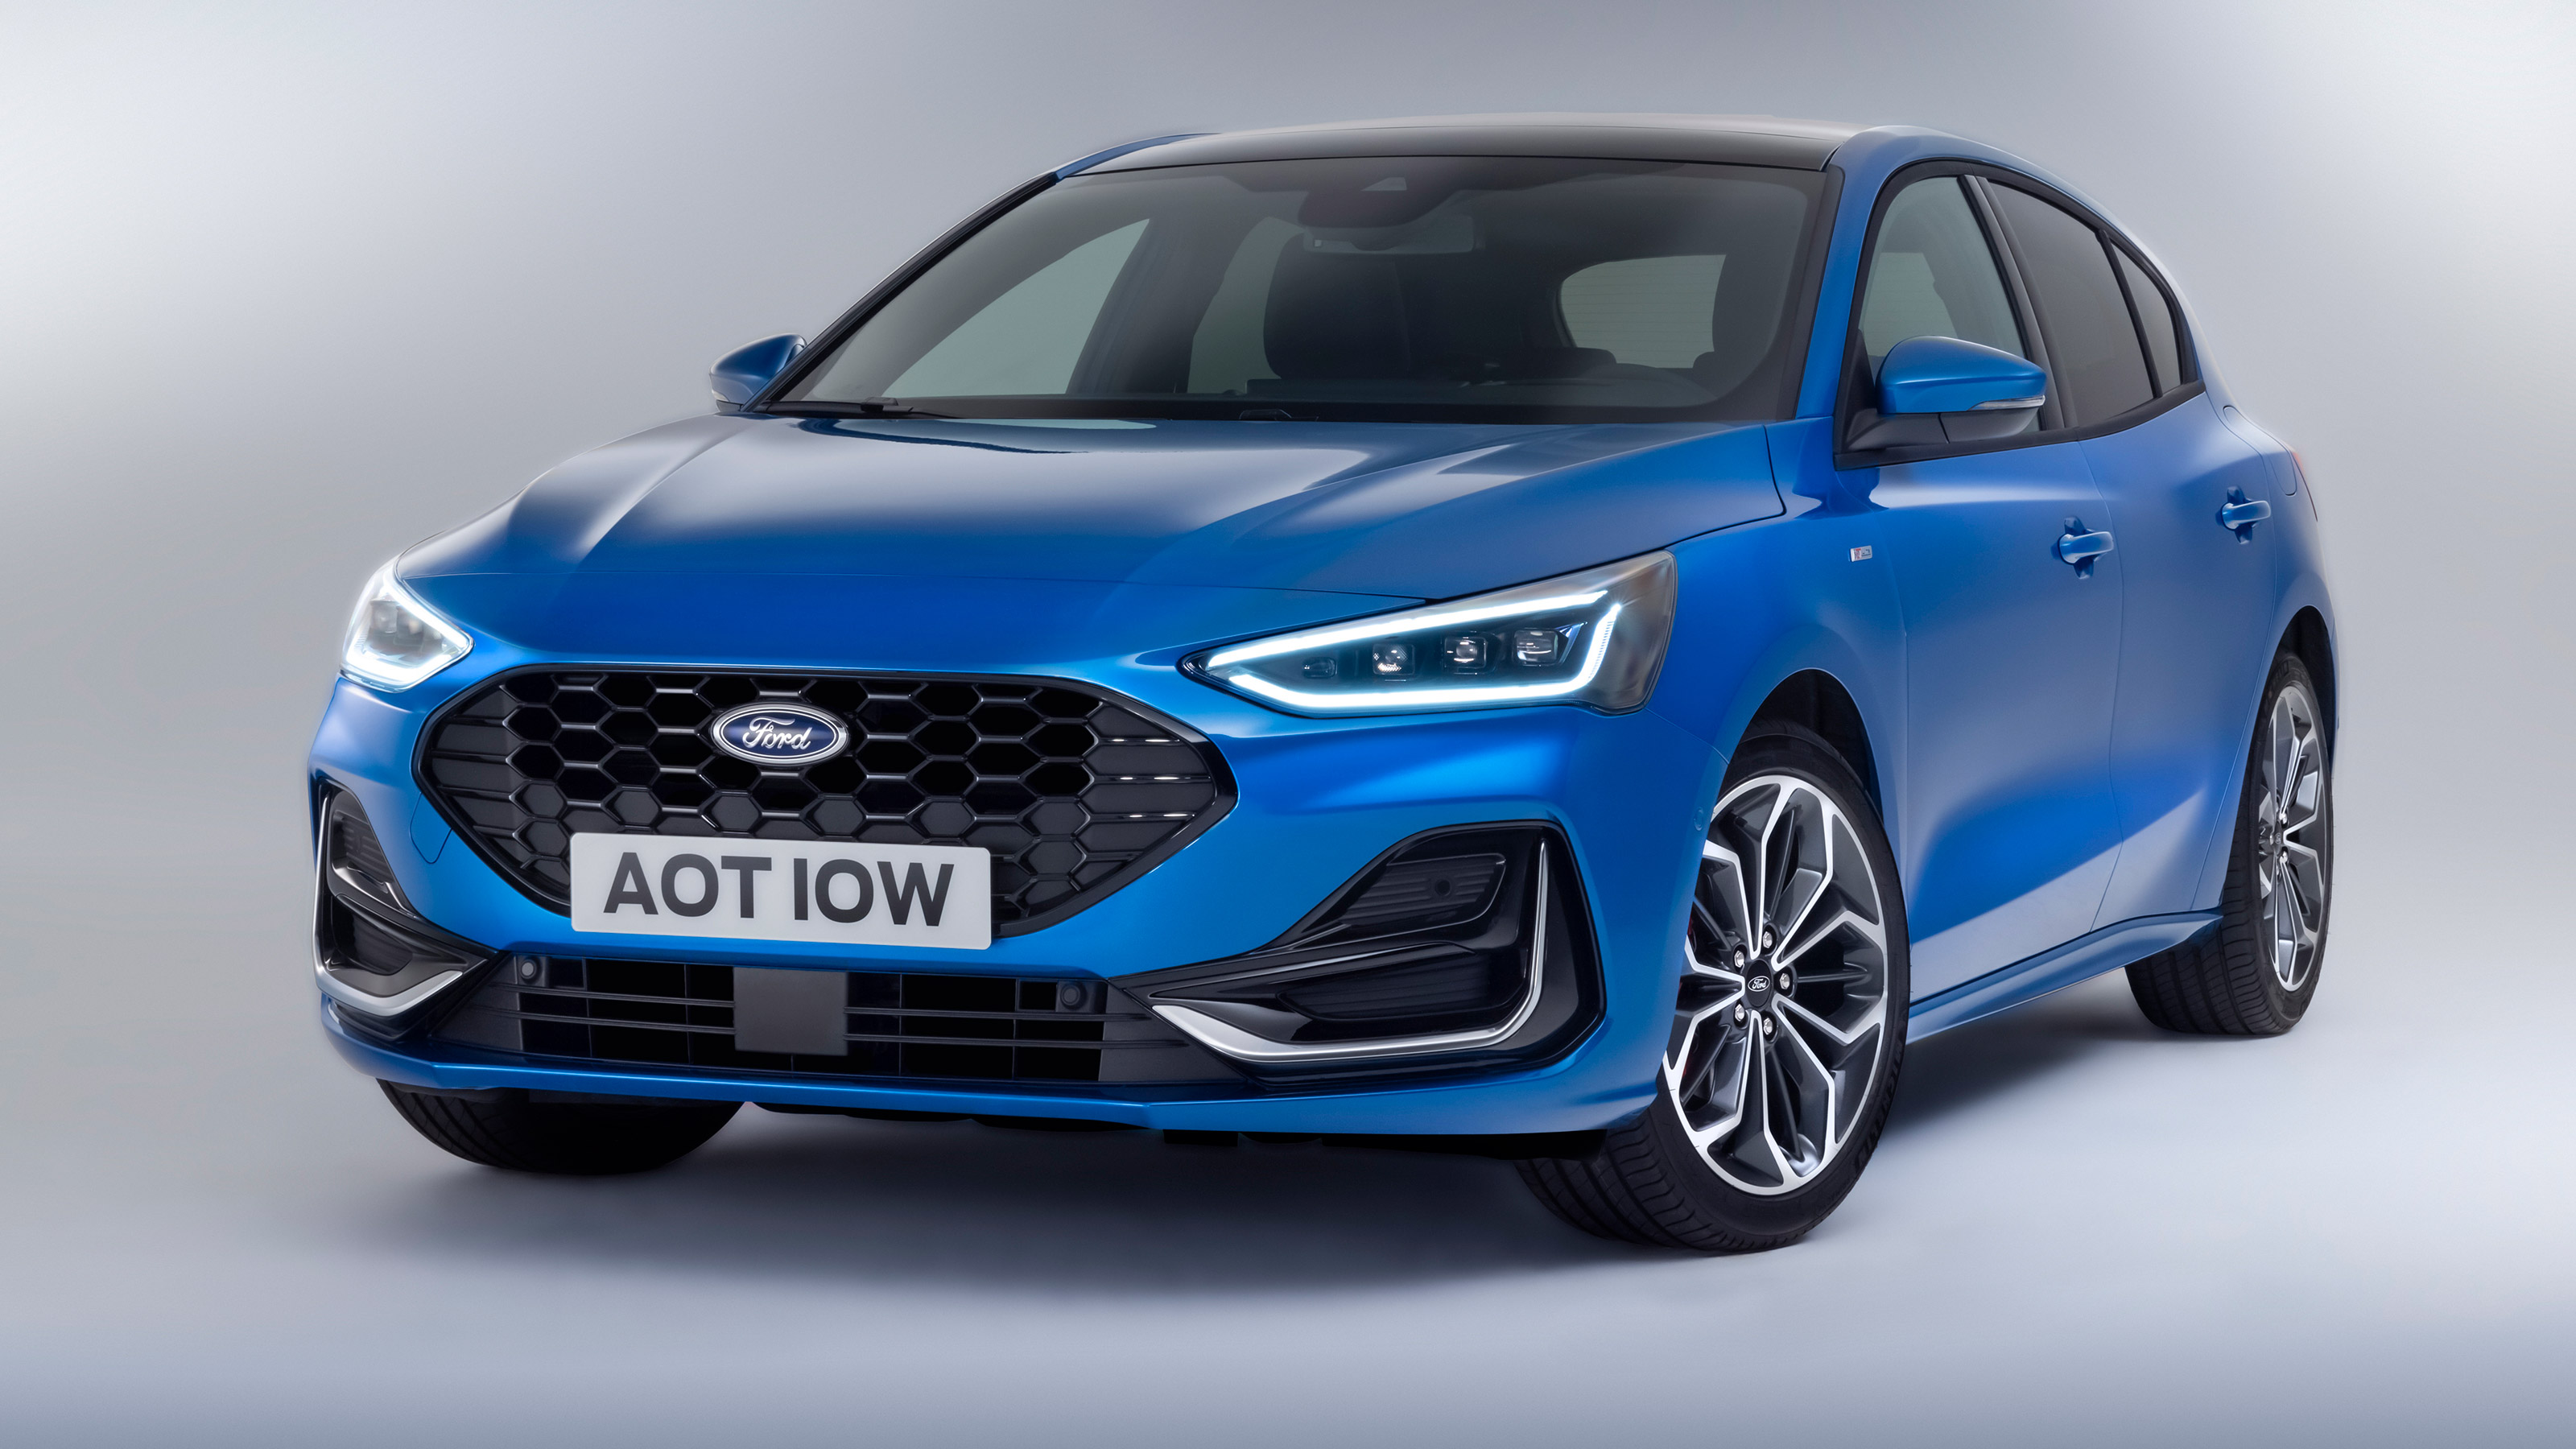 Refreshed 2022 Ford Focus ST revealed – key tech and styling